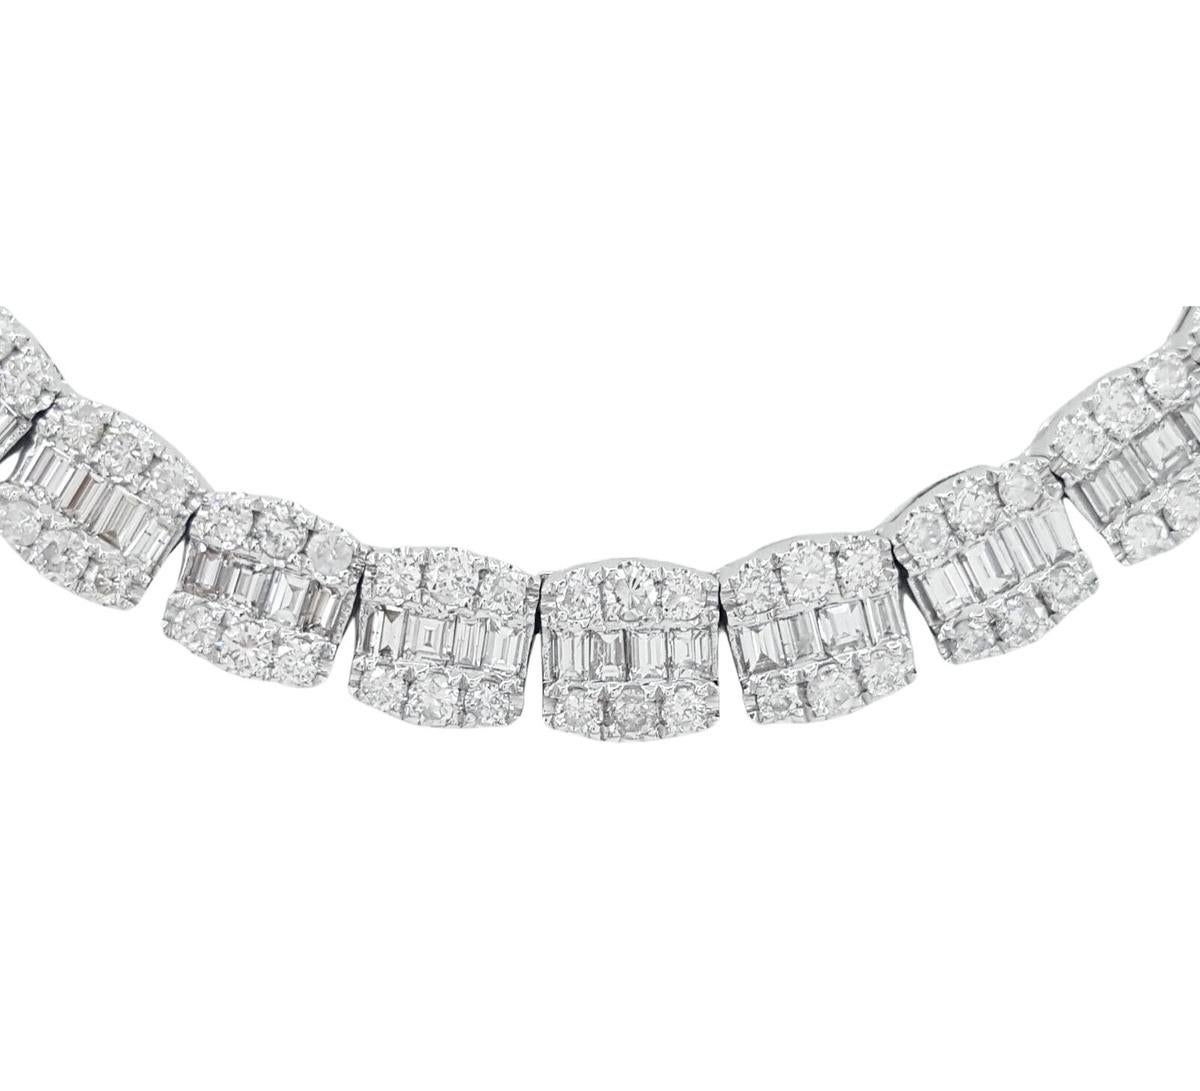 17 ct Total Weight Round Brilliant & Baguette Cut Diamonds Necklace. 

The necklace weighs 54.9 grams, 20